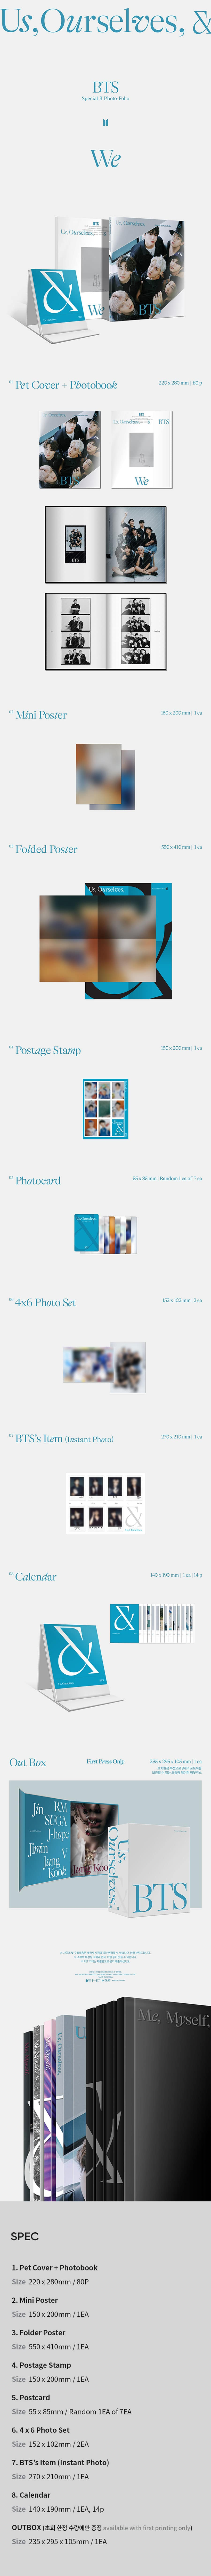 bts-special-8-photo-folio-us-ourselves-and-bts-we-set-wholesale